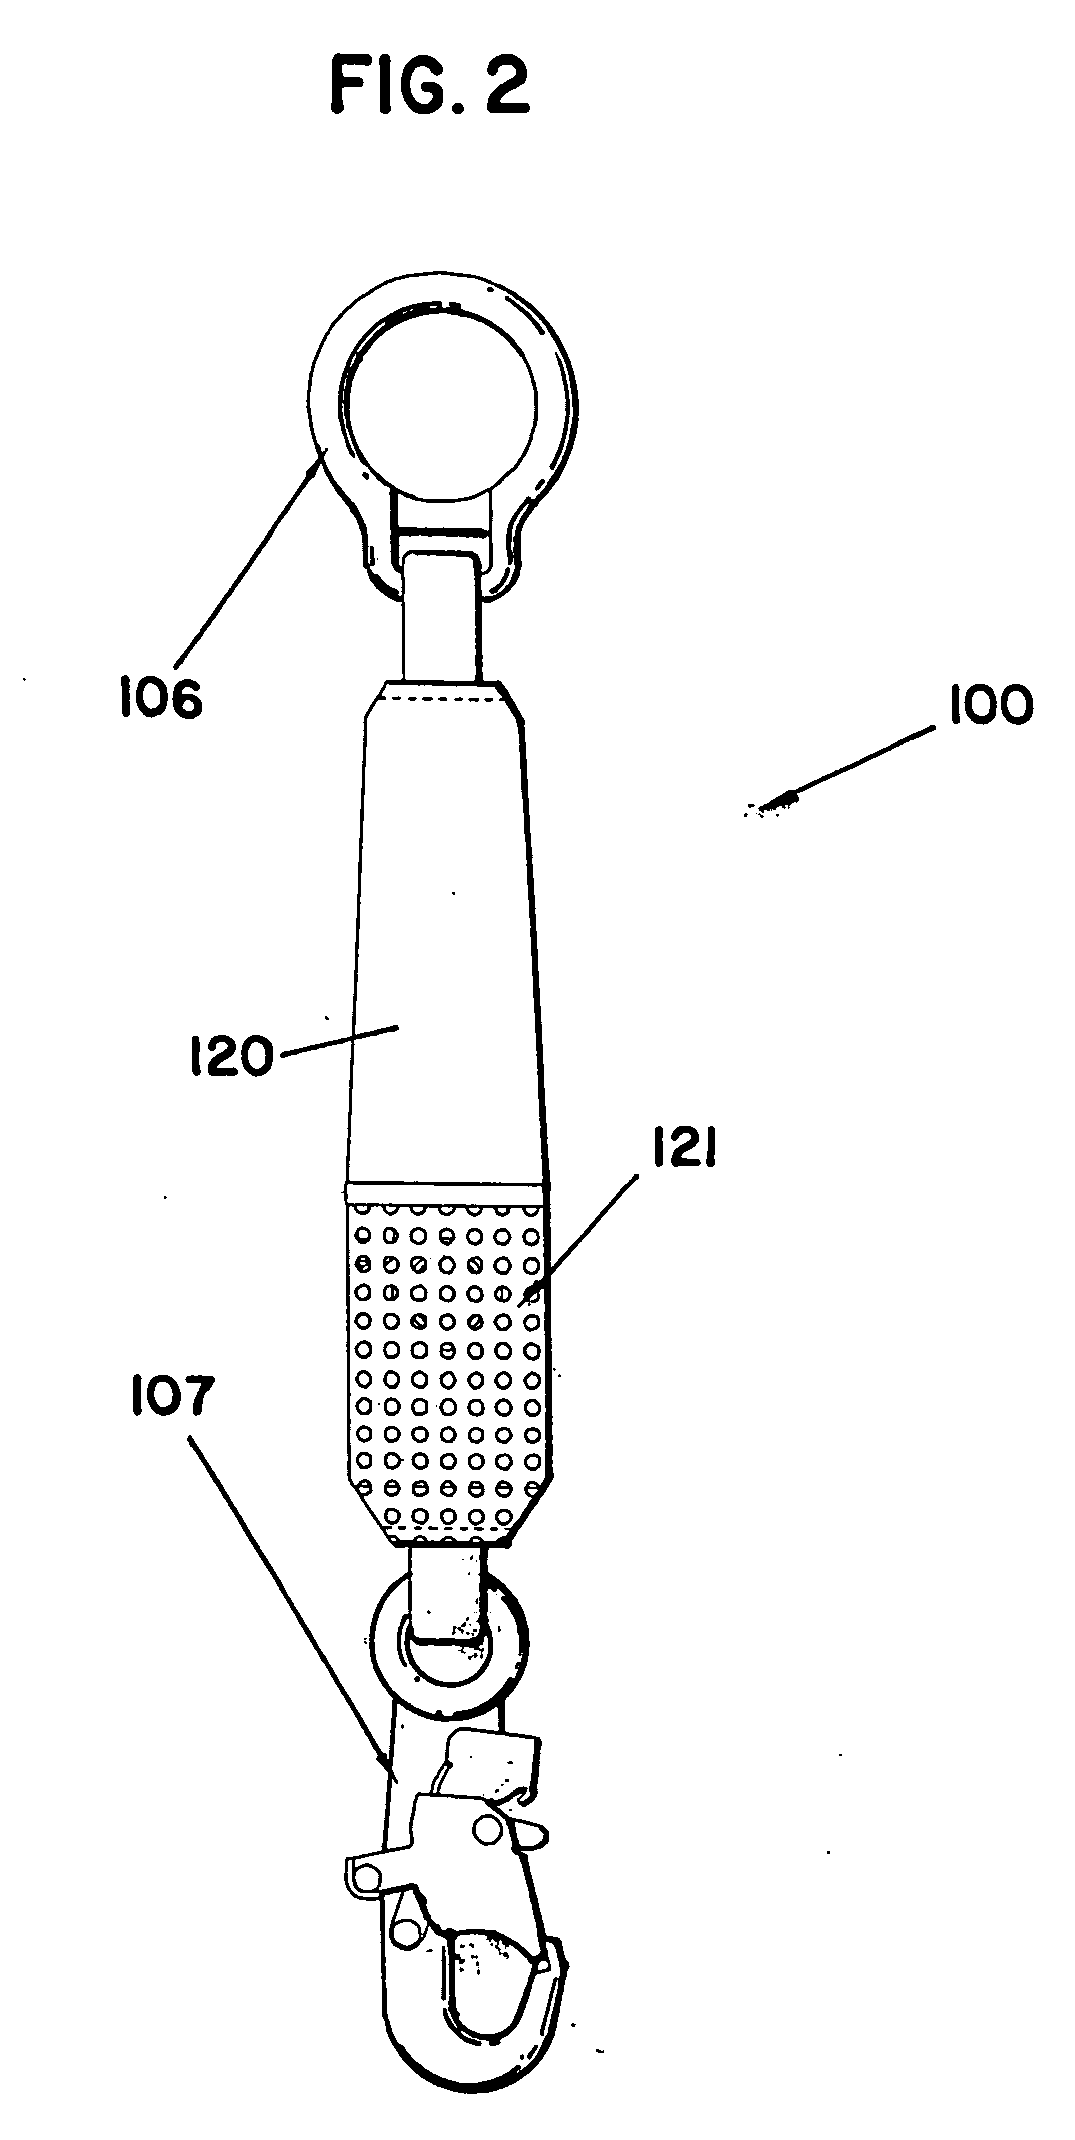 Alarm device for use with fall protection equipment